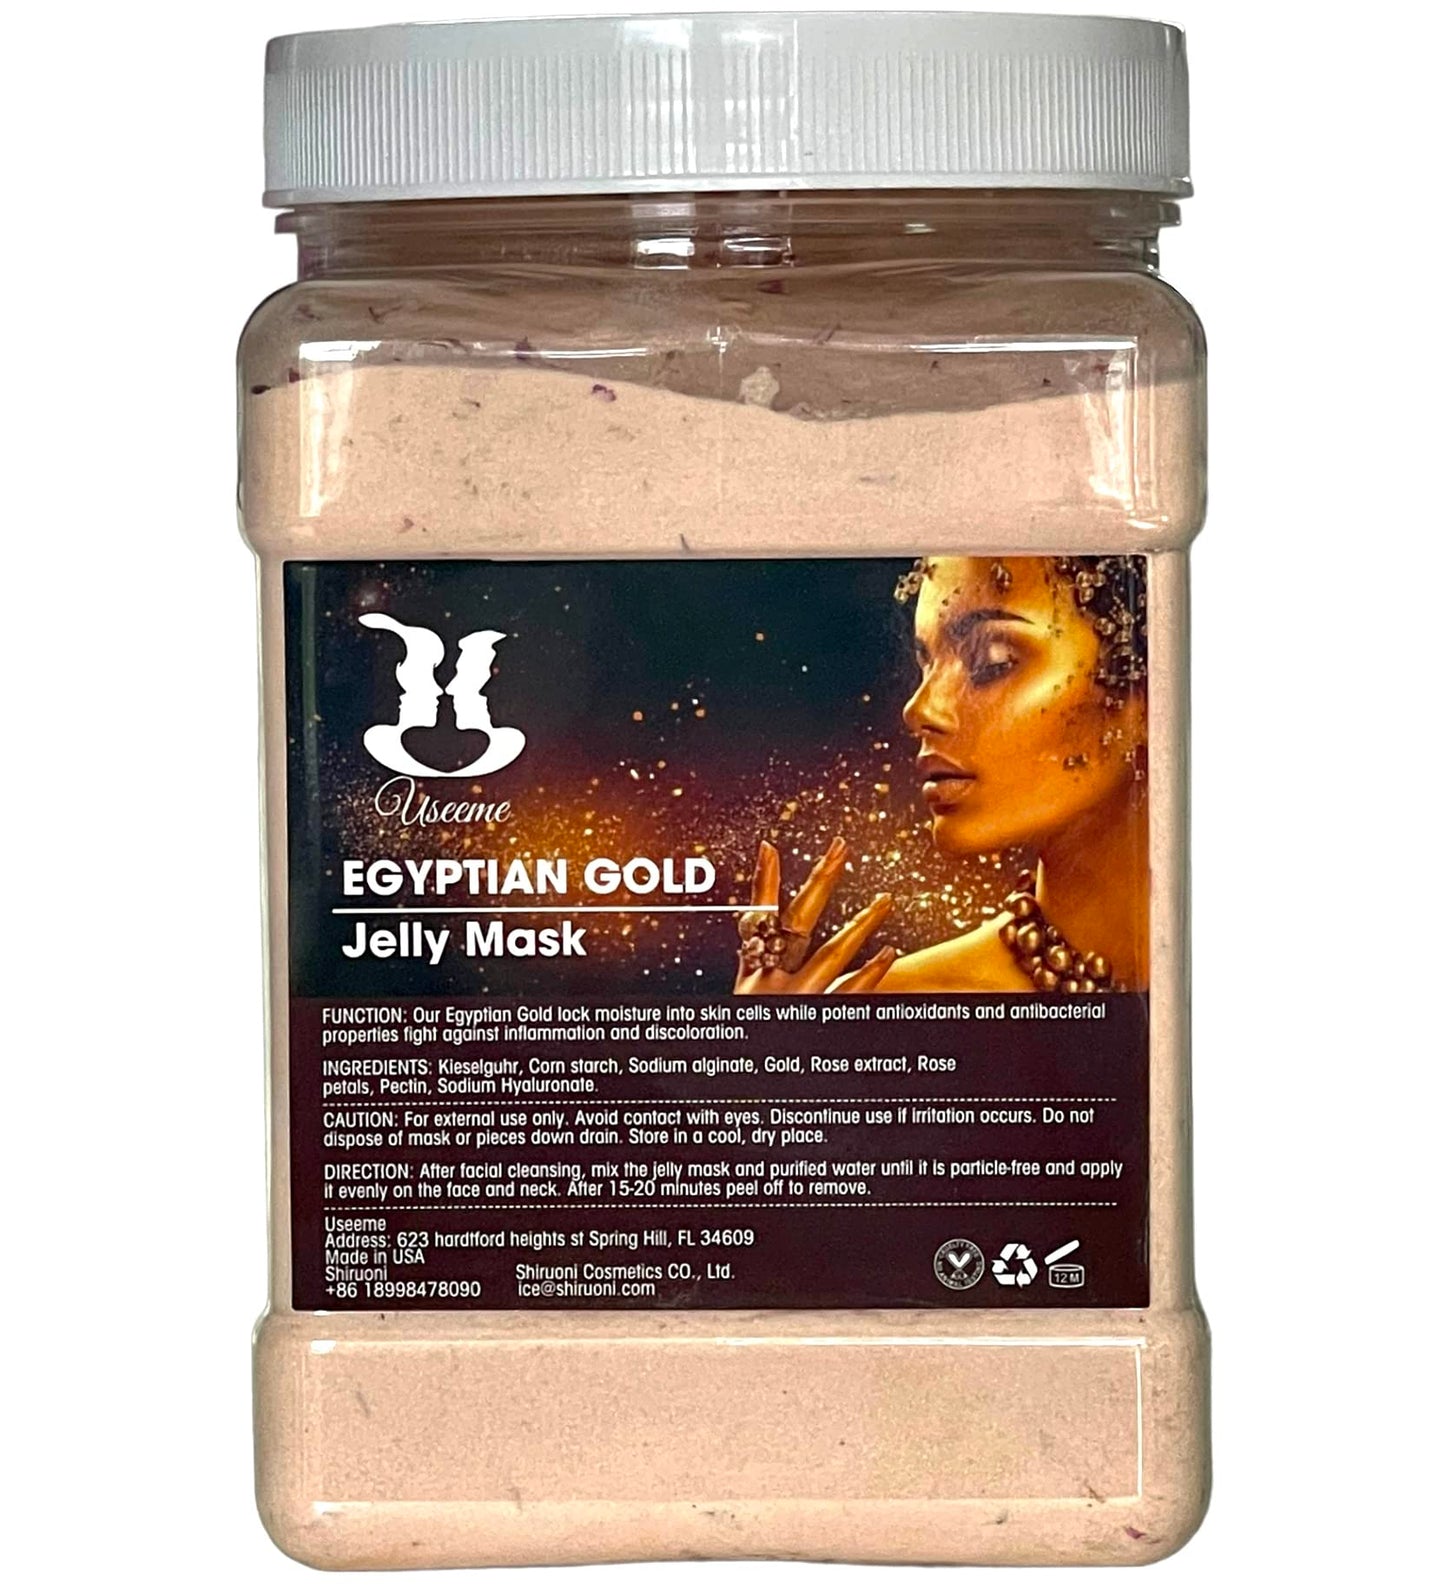 Egyptian Rose Jelly Mask Powder With Gold Rubber Face Mask Peel-Off Jar